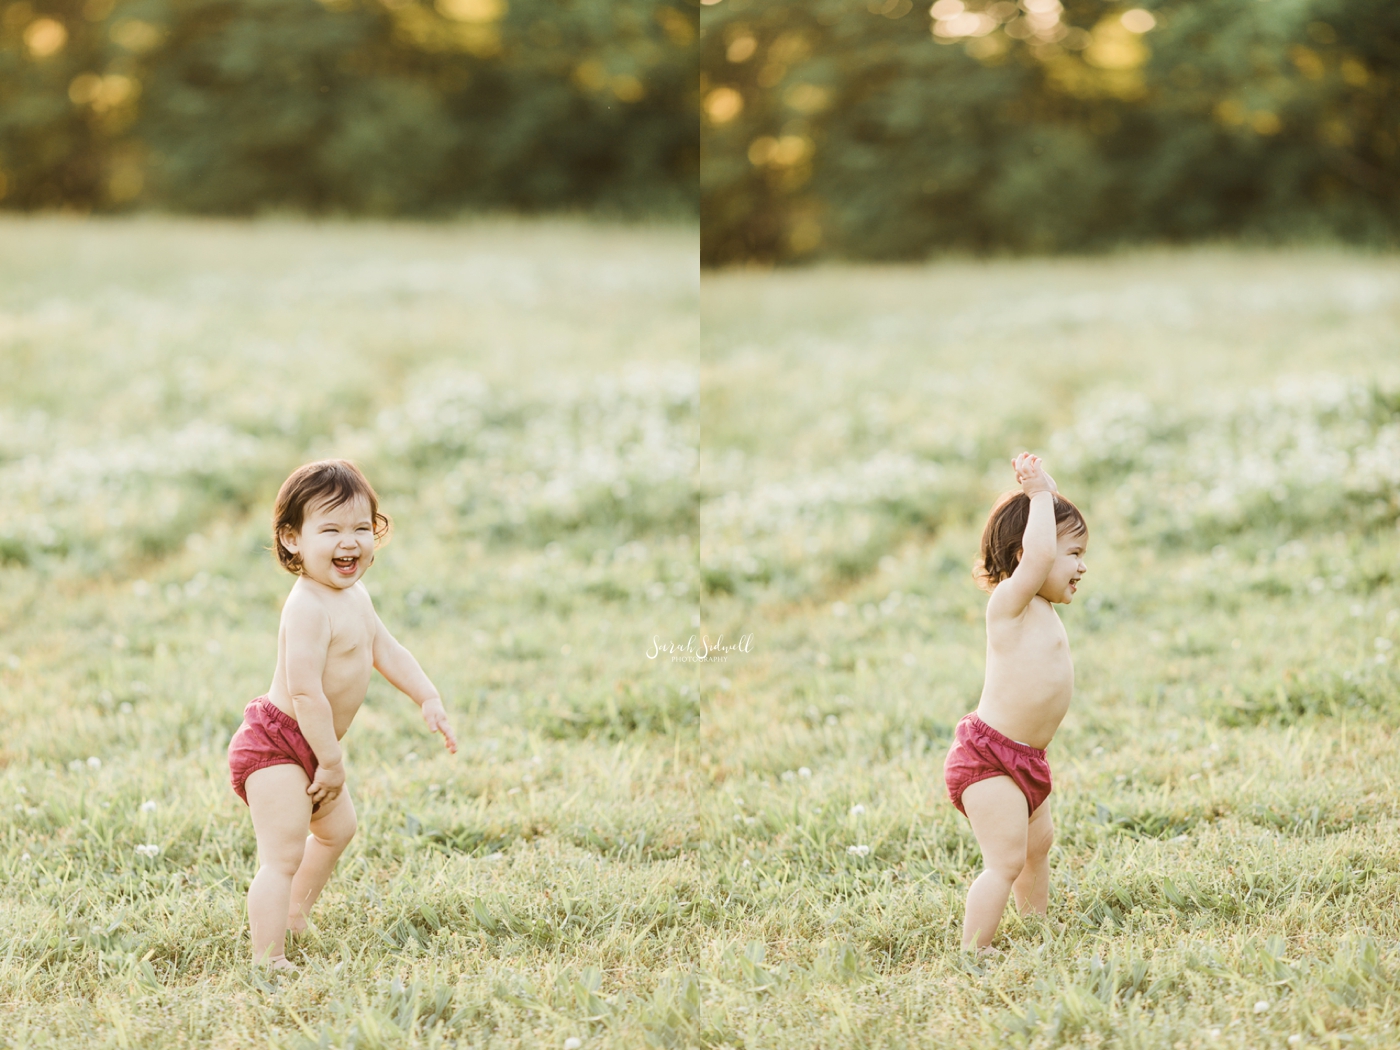 A baby plays in a grassy field wearing only bloomers. 